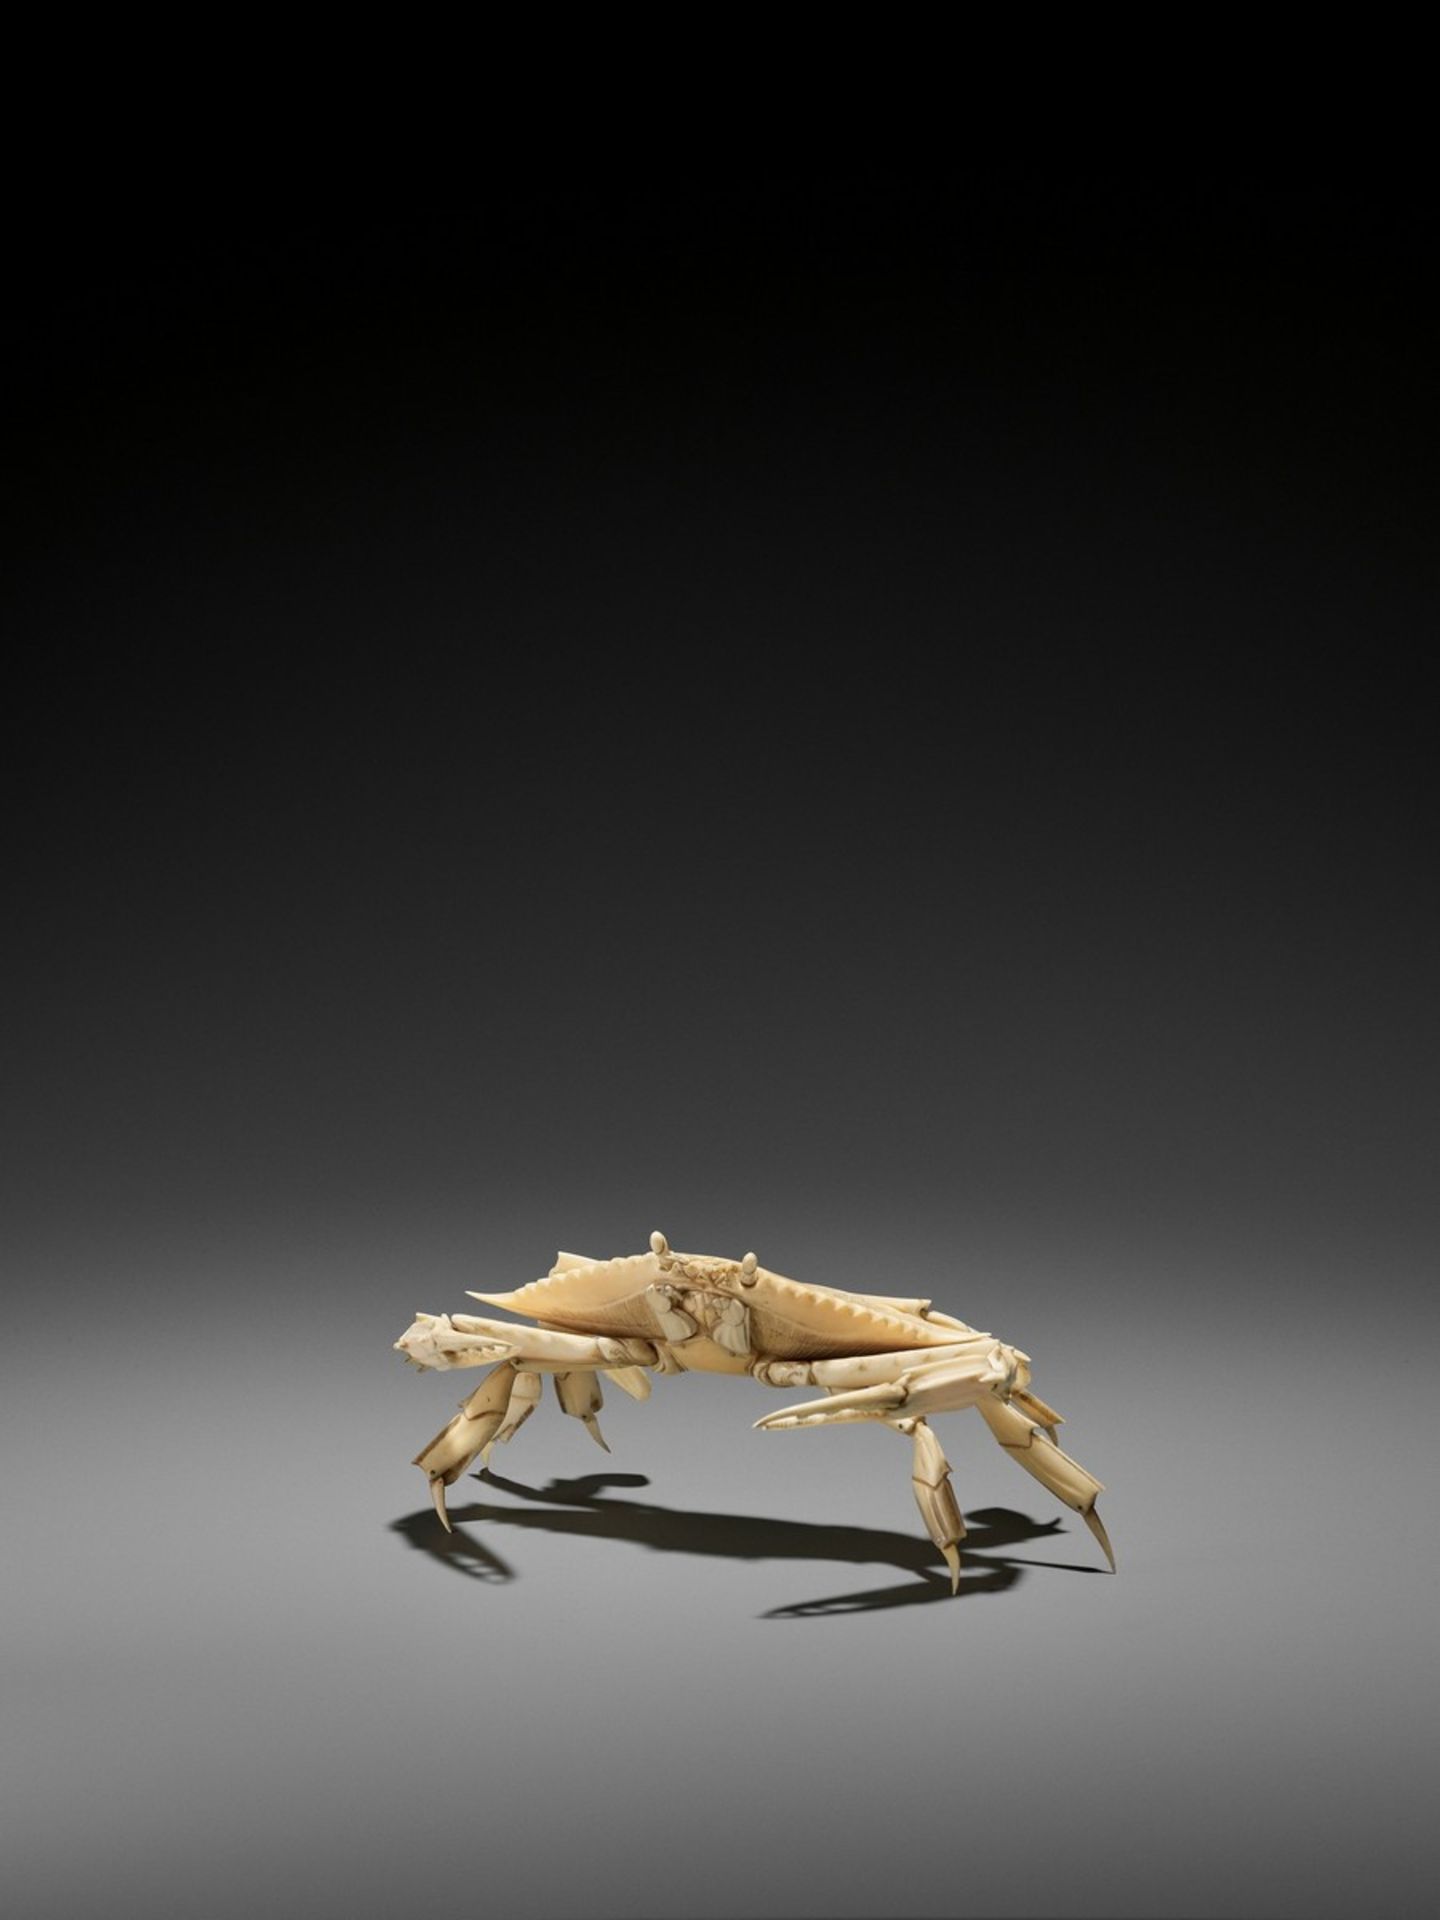 AN ARTICULATED IVORY OKIMONO OF A CRAB WITH WIDE CARAPACE Japan, Meiji period (1868-1912)The crab